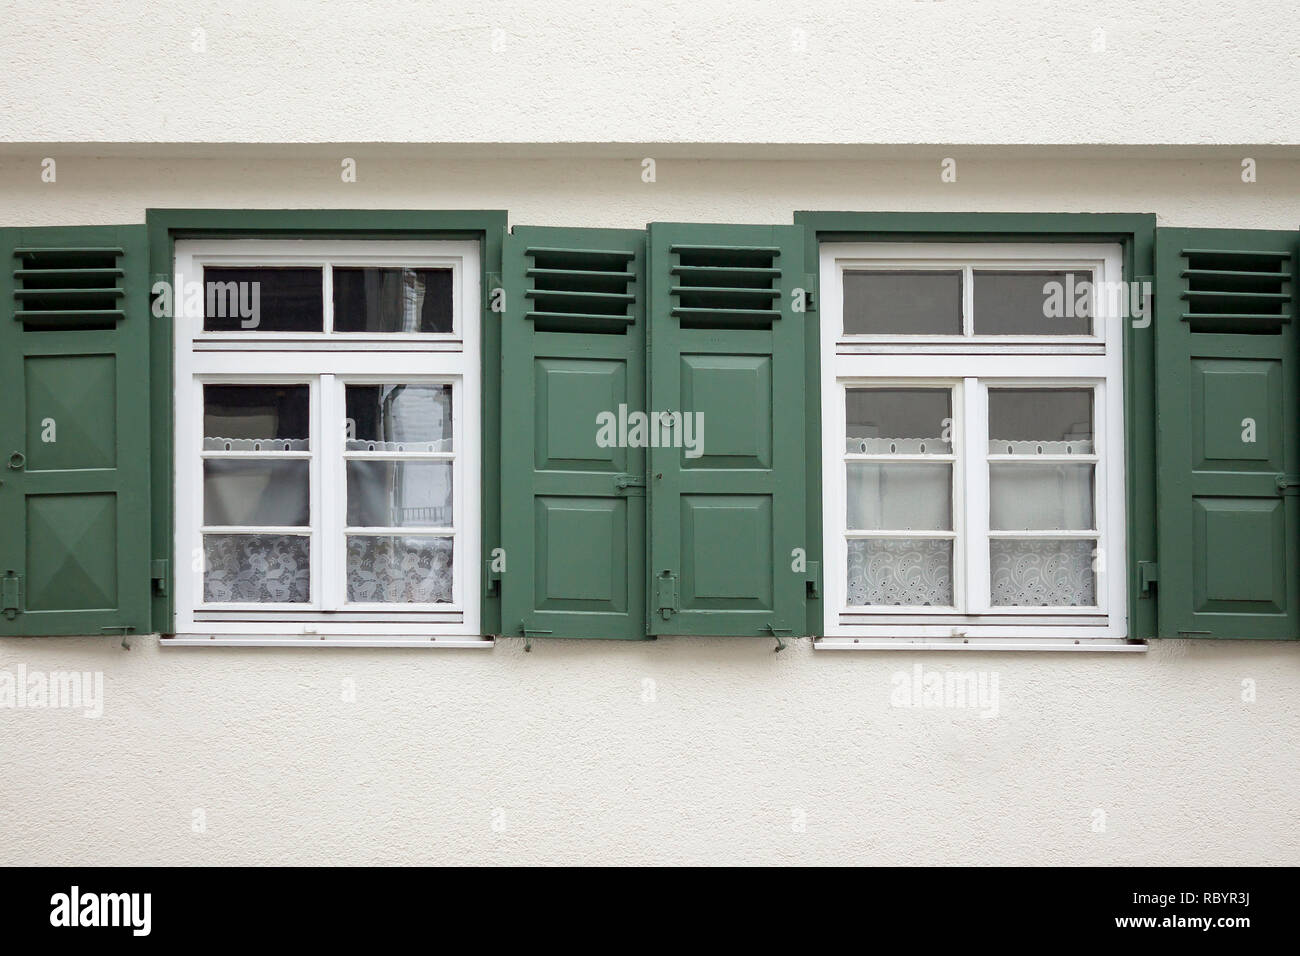 Old ancient wooden window with blinds or shutters. Scenic original and colorful view of antique windows in old city Sindelfingen, Germany. Isolated on wall. No people. Front view. Old fashioned style. Stock Photo